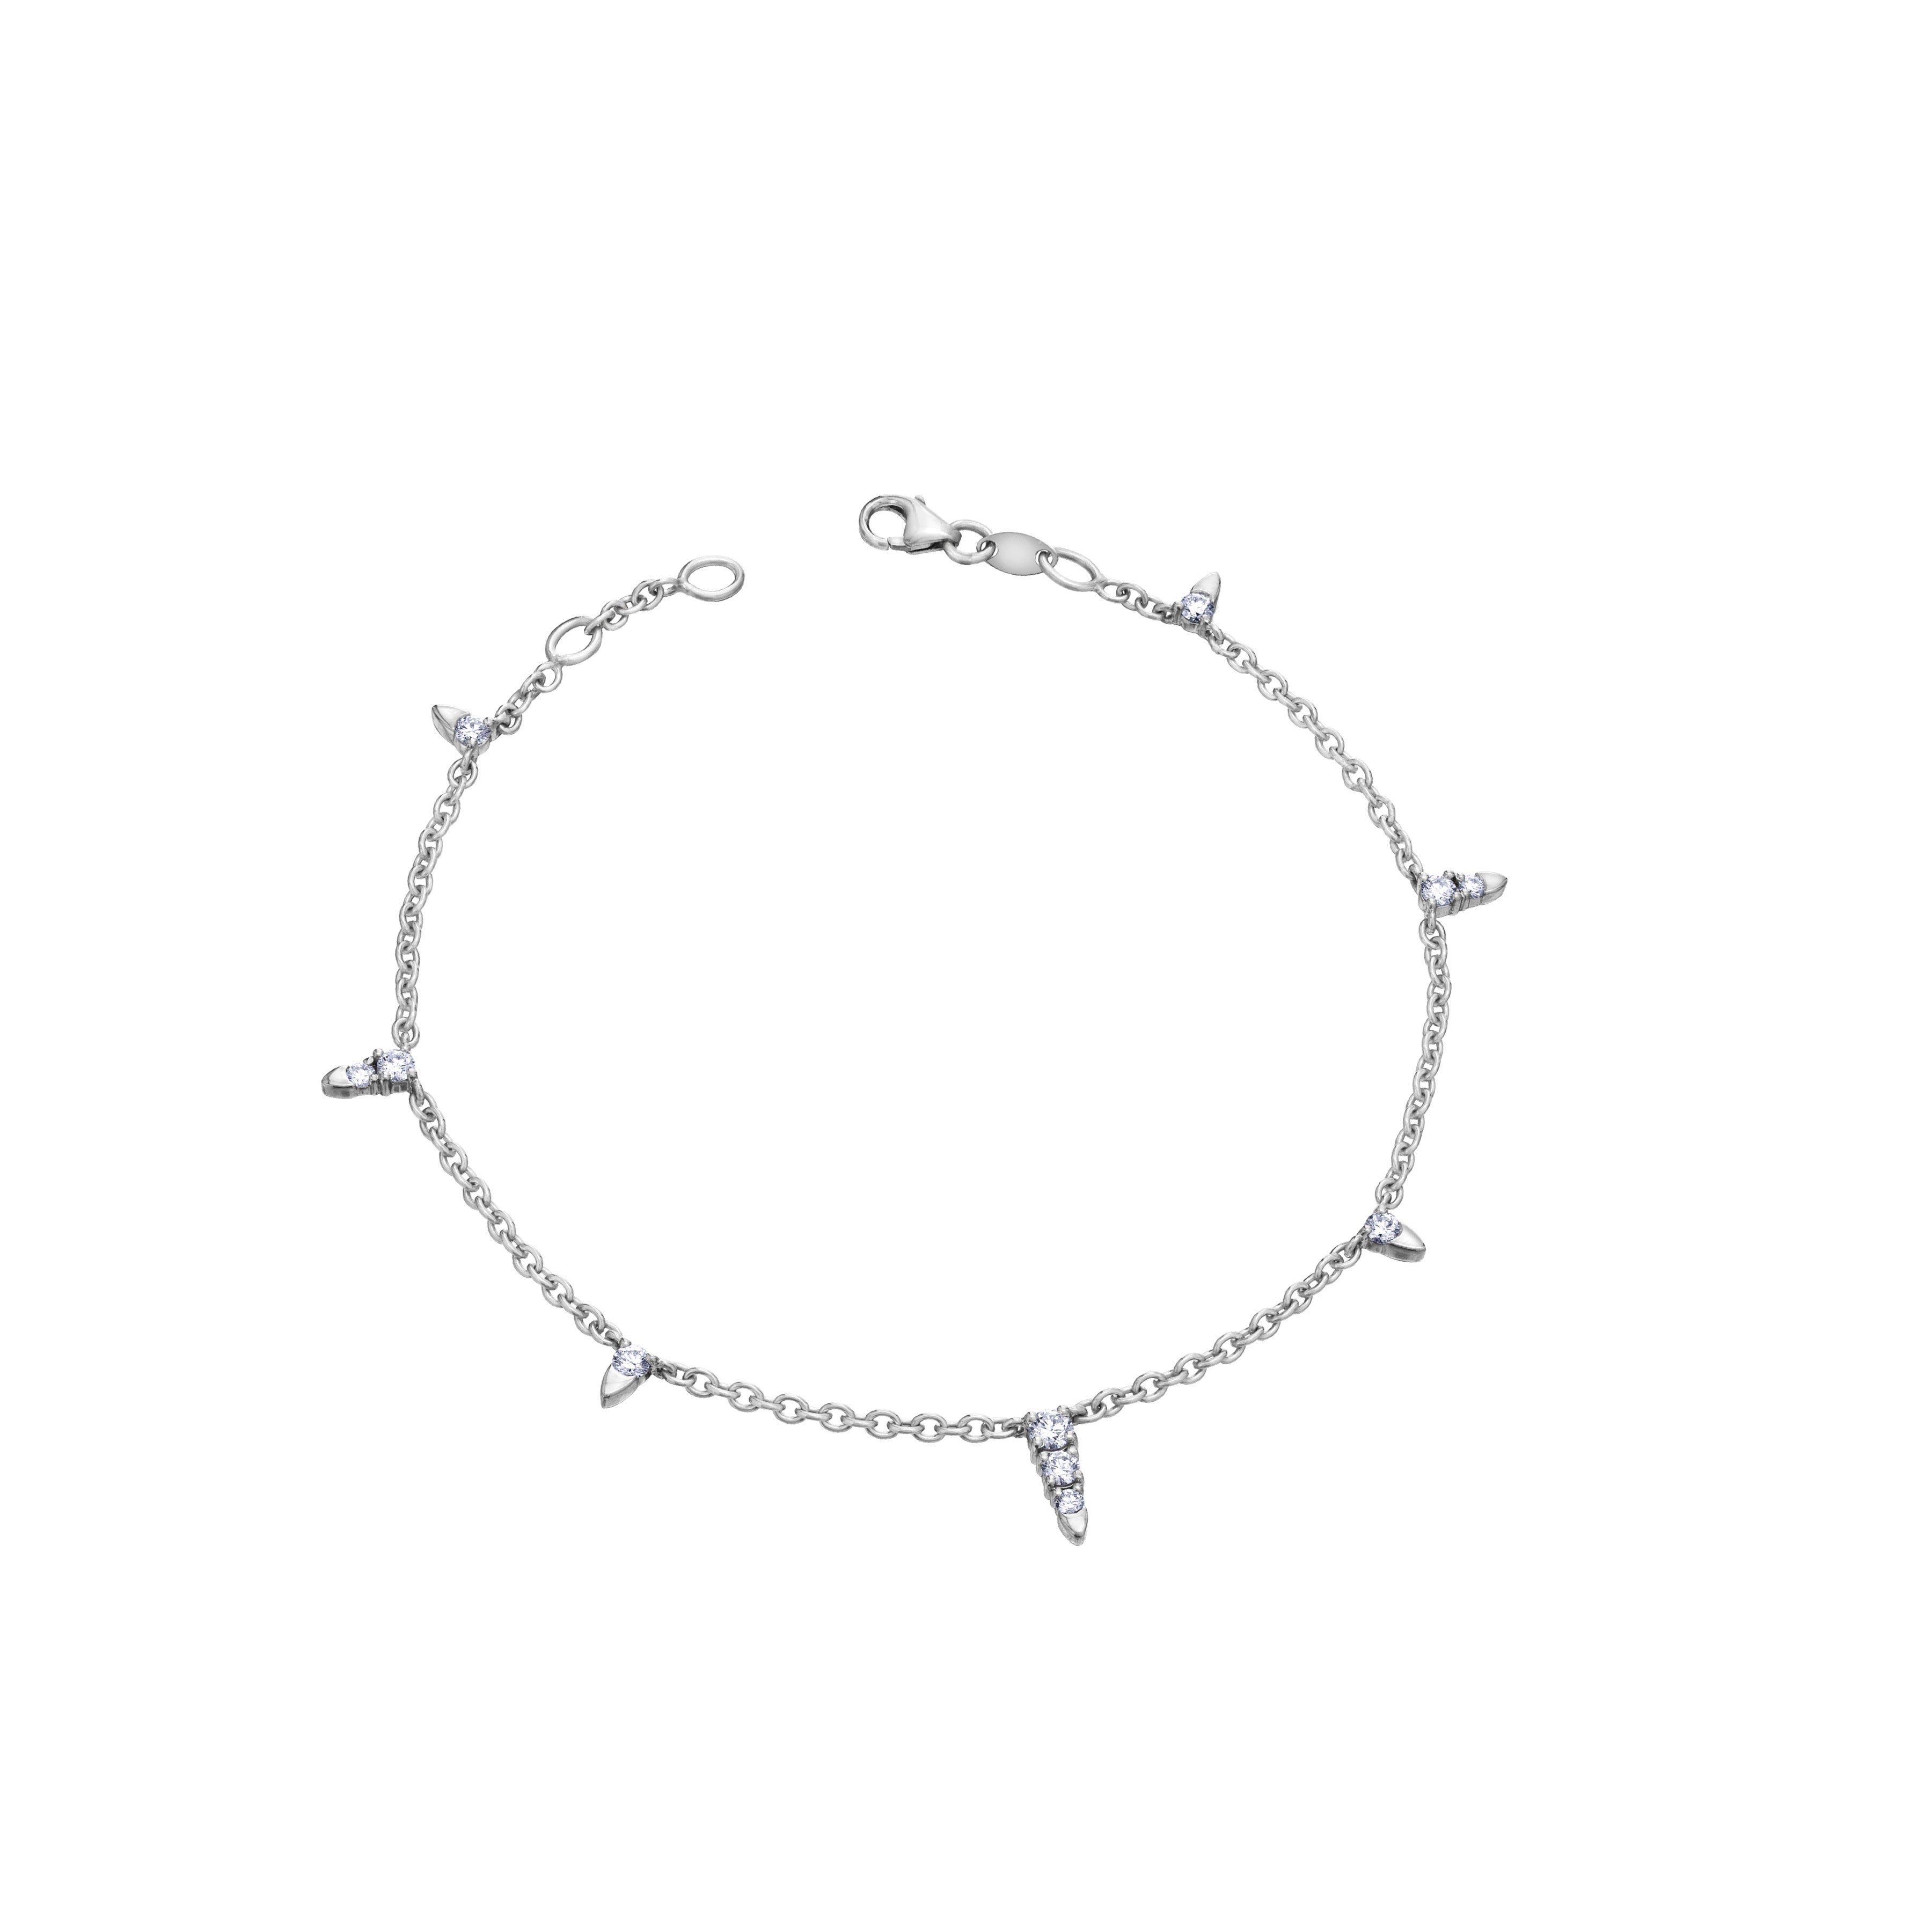 Crafted in 14KT white Certified Canadian Gold, this bracelet features baby icicles set with round brilliant-cut Canadian diamonds.